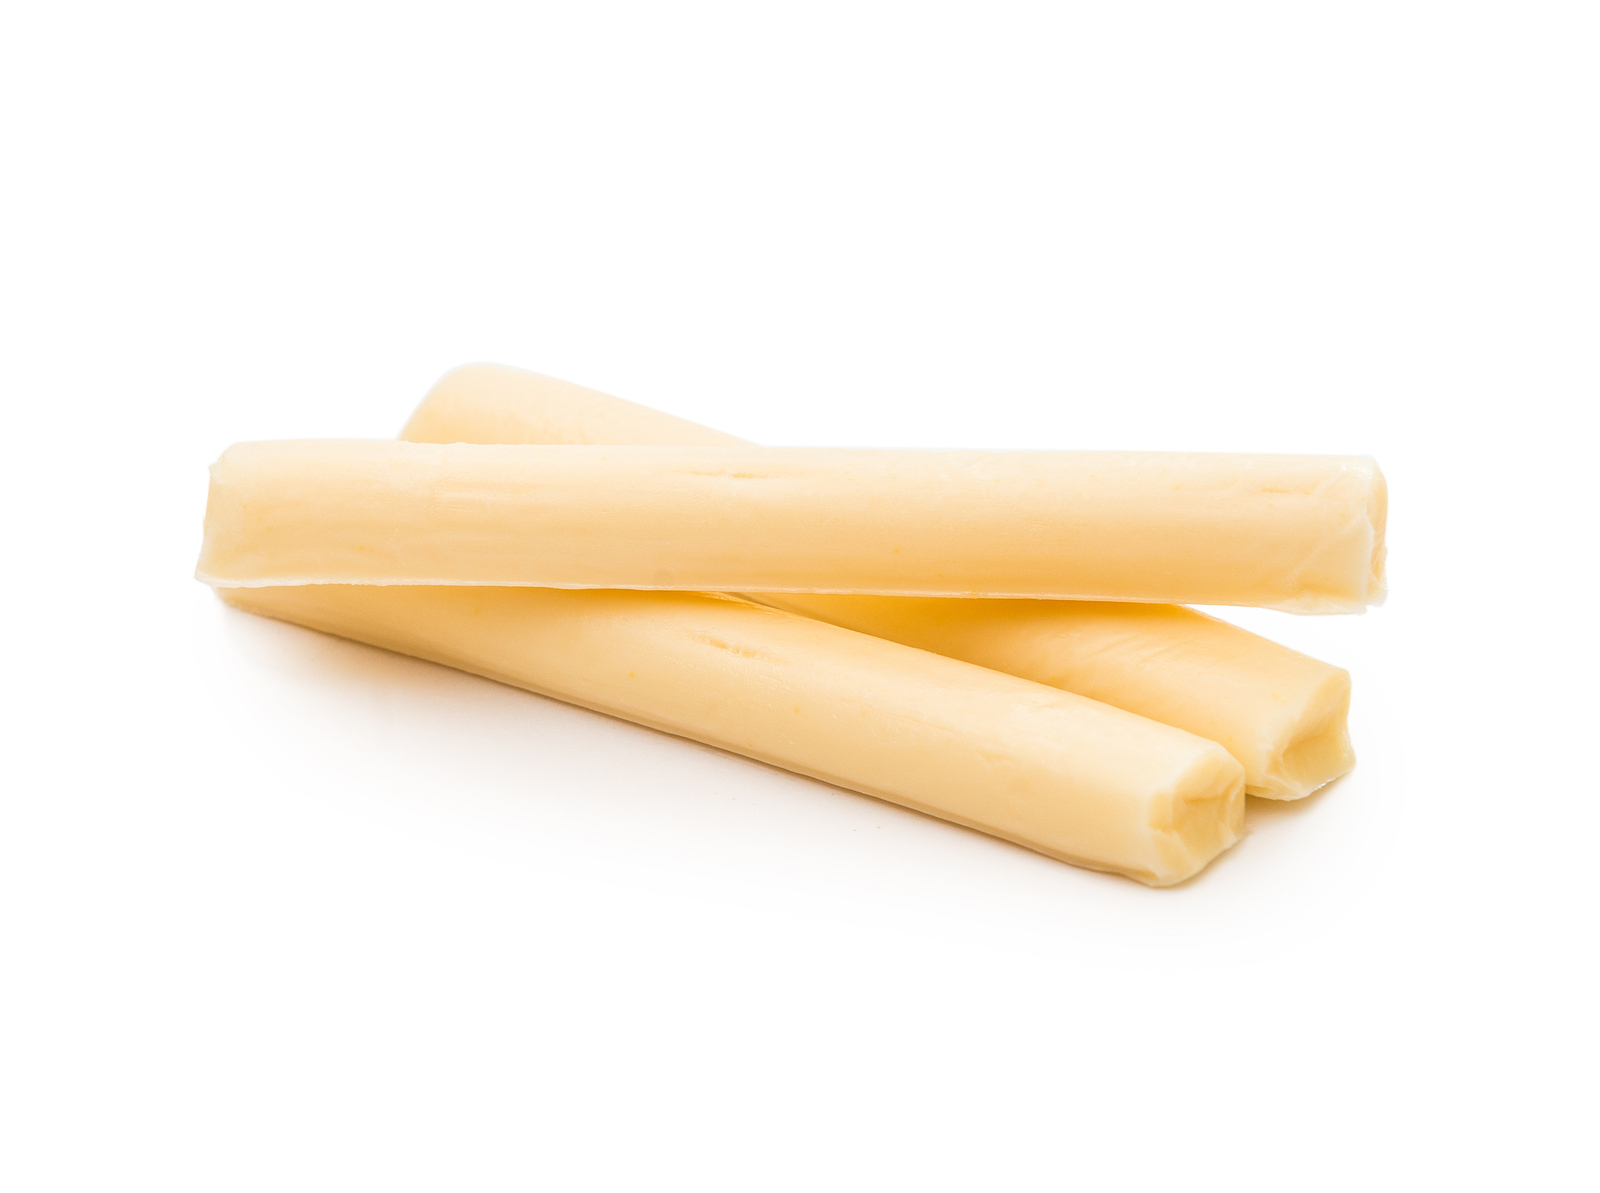 Protein Source #3: Low-Fat String Cheese